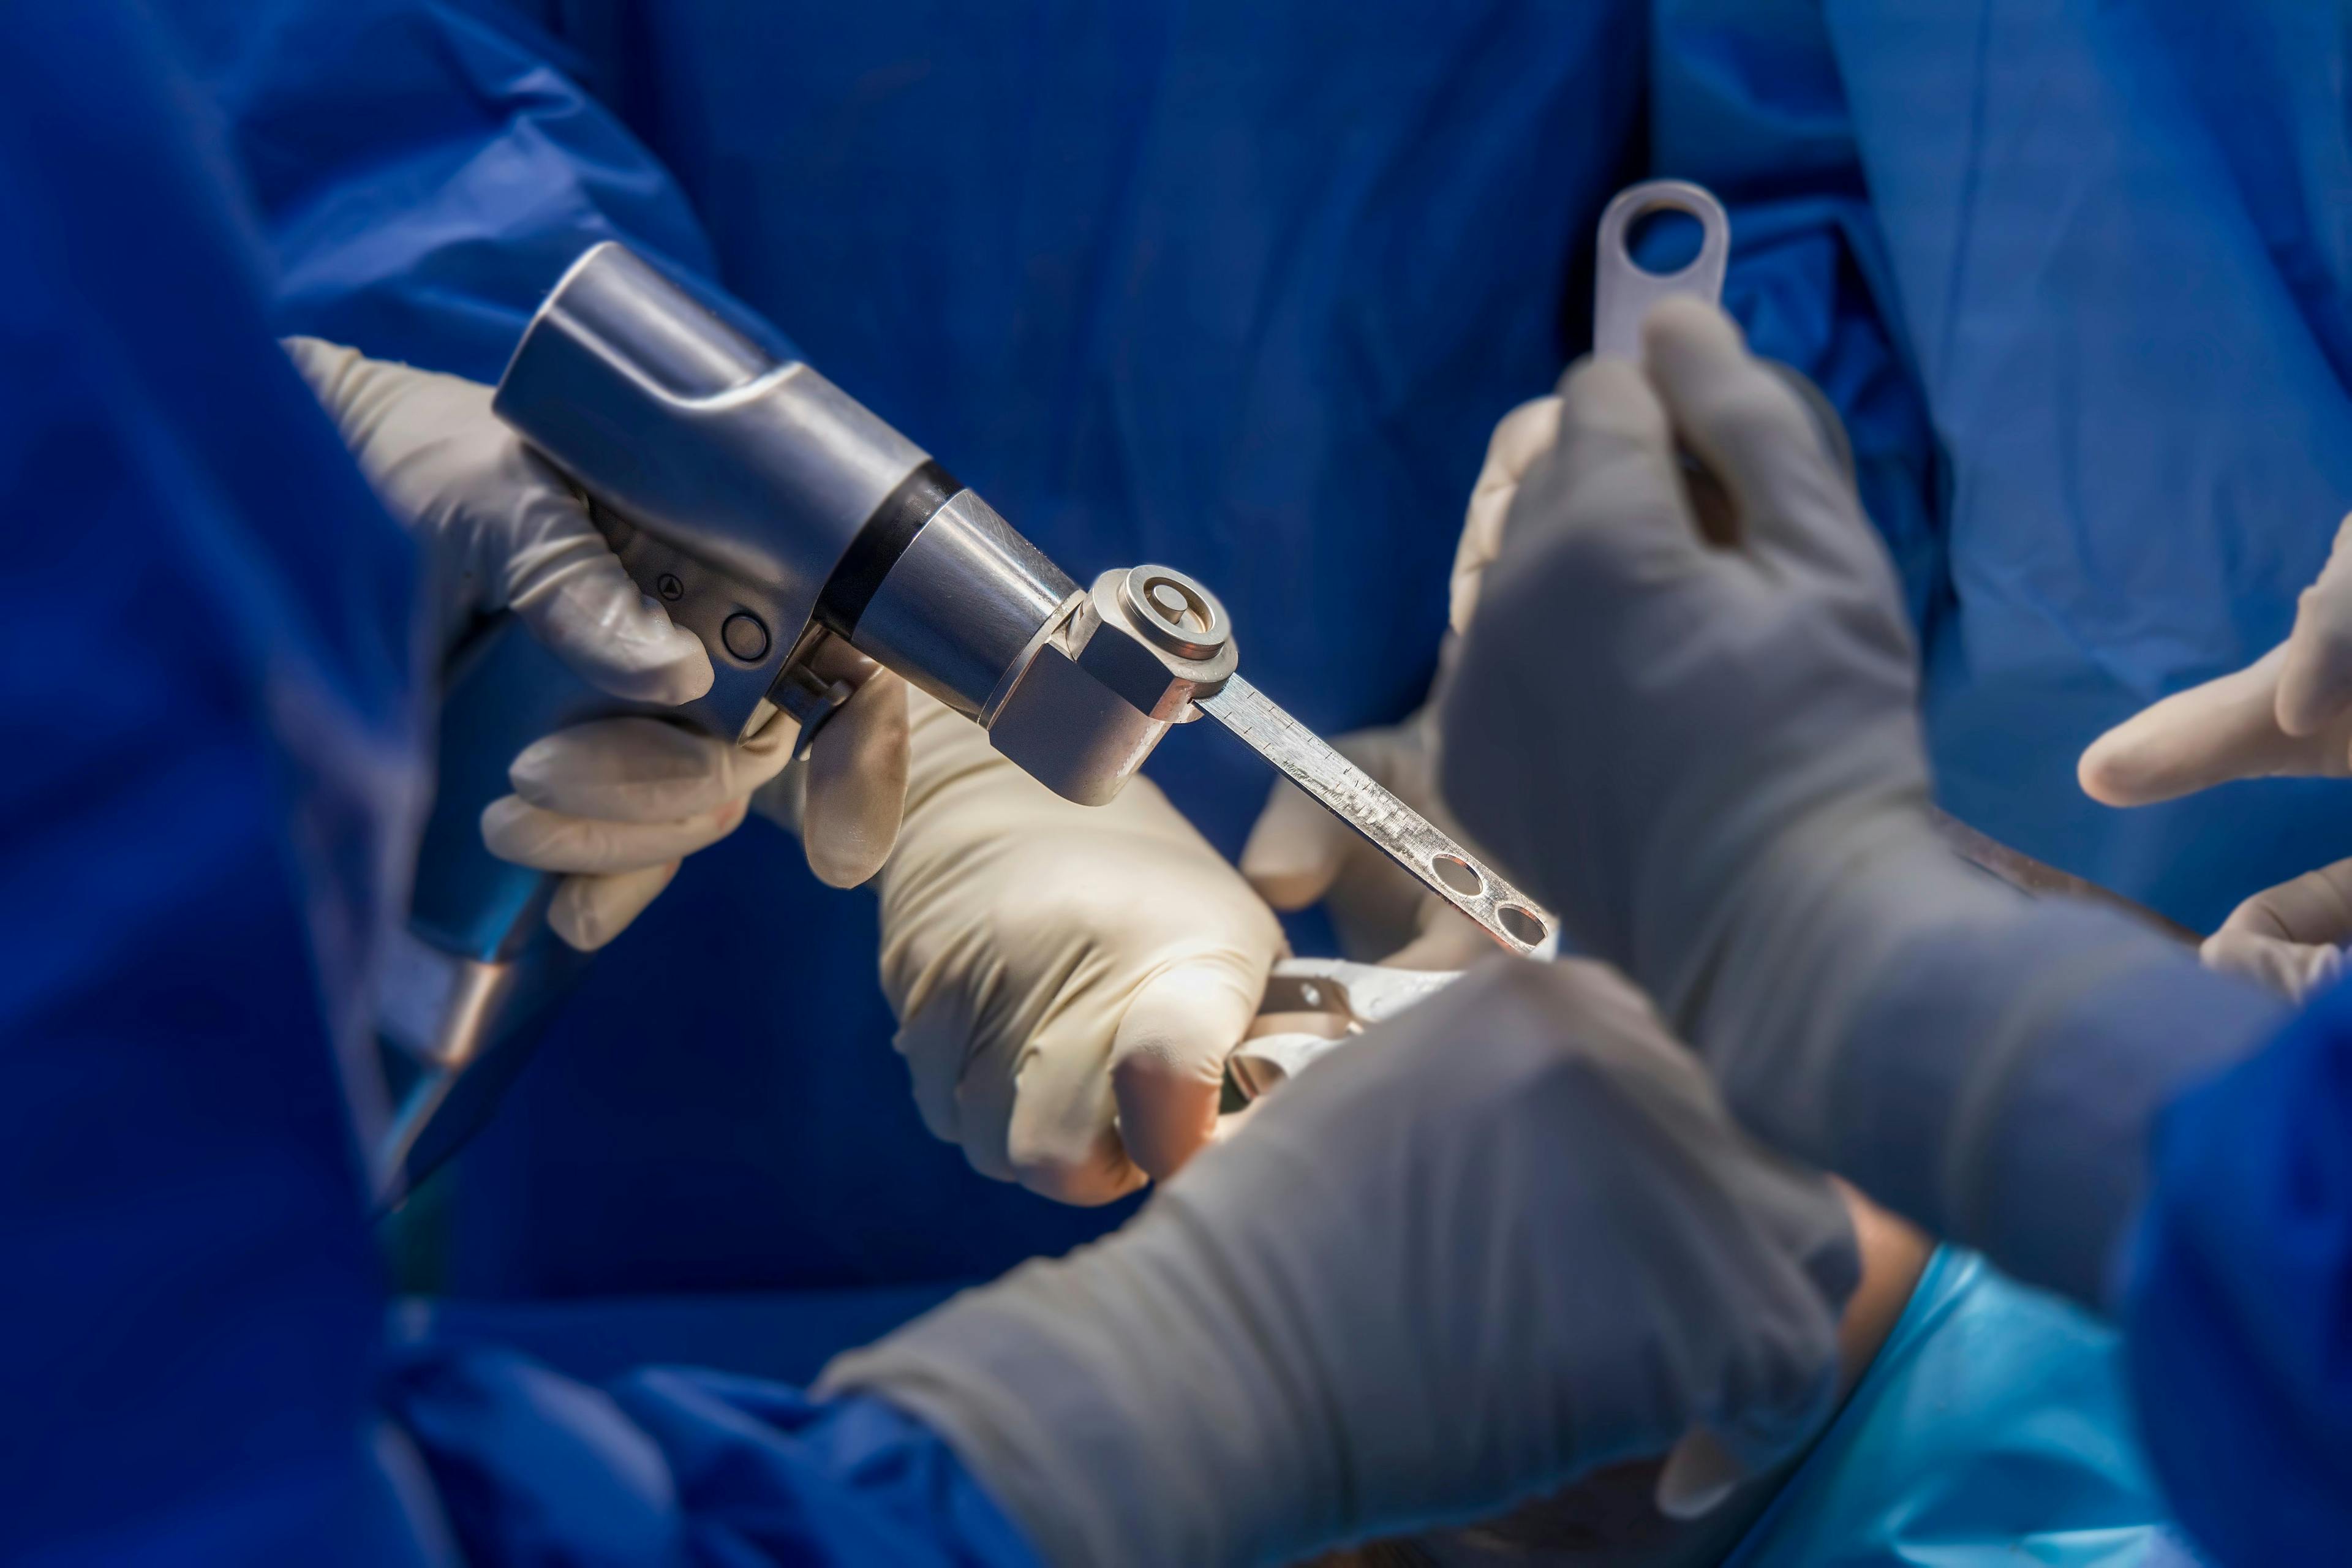 Healthgrades has released its inaugural report card on how hospitals fared in knee and joint replacements on an outpatient basis. (Image credit: ©Issara - stock.adobe.com)